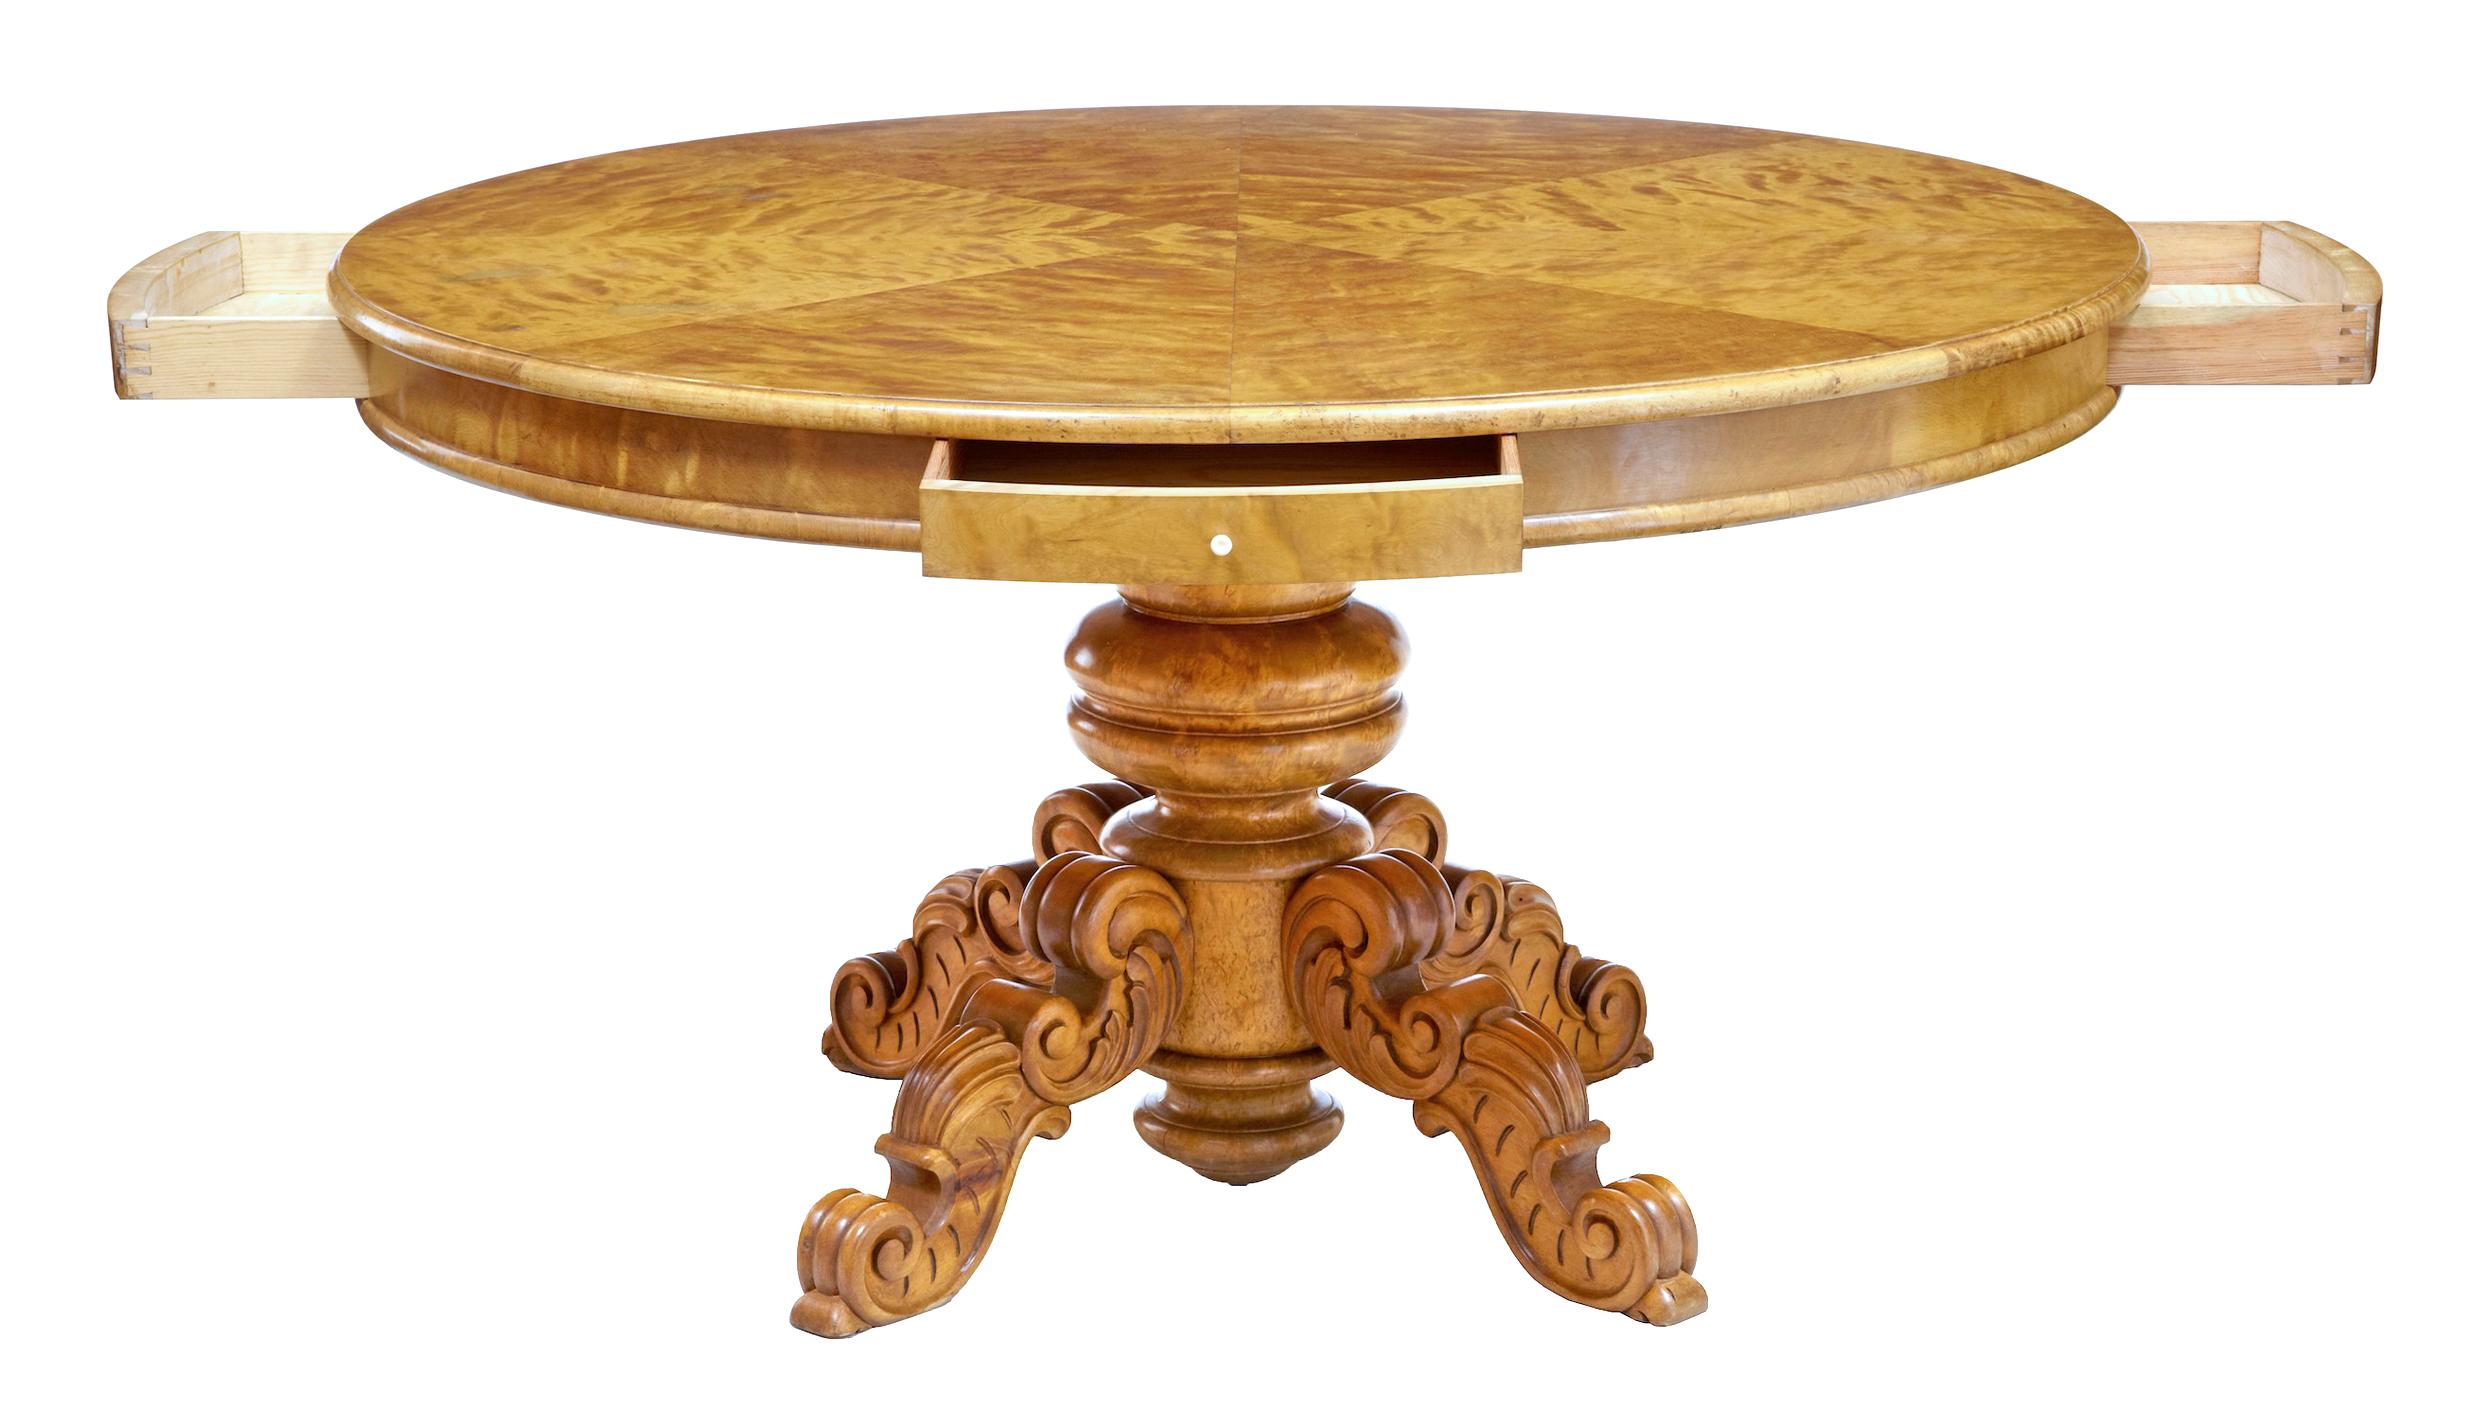 19th century birch Swedish carved drum centre table, circa 1890.

Large circular center table, with 4 shallow drawers placed at equal positions around the edge. Top arranged with segmented veneer to provide a striking appearance.

Top has an